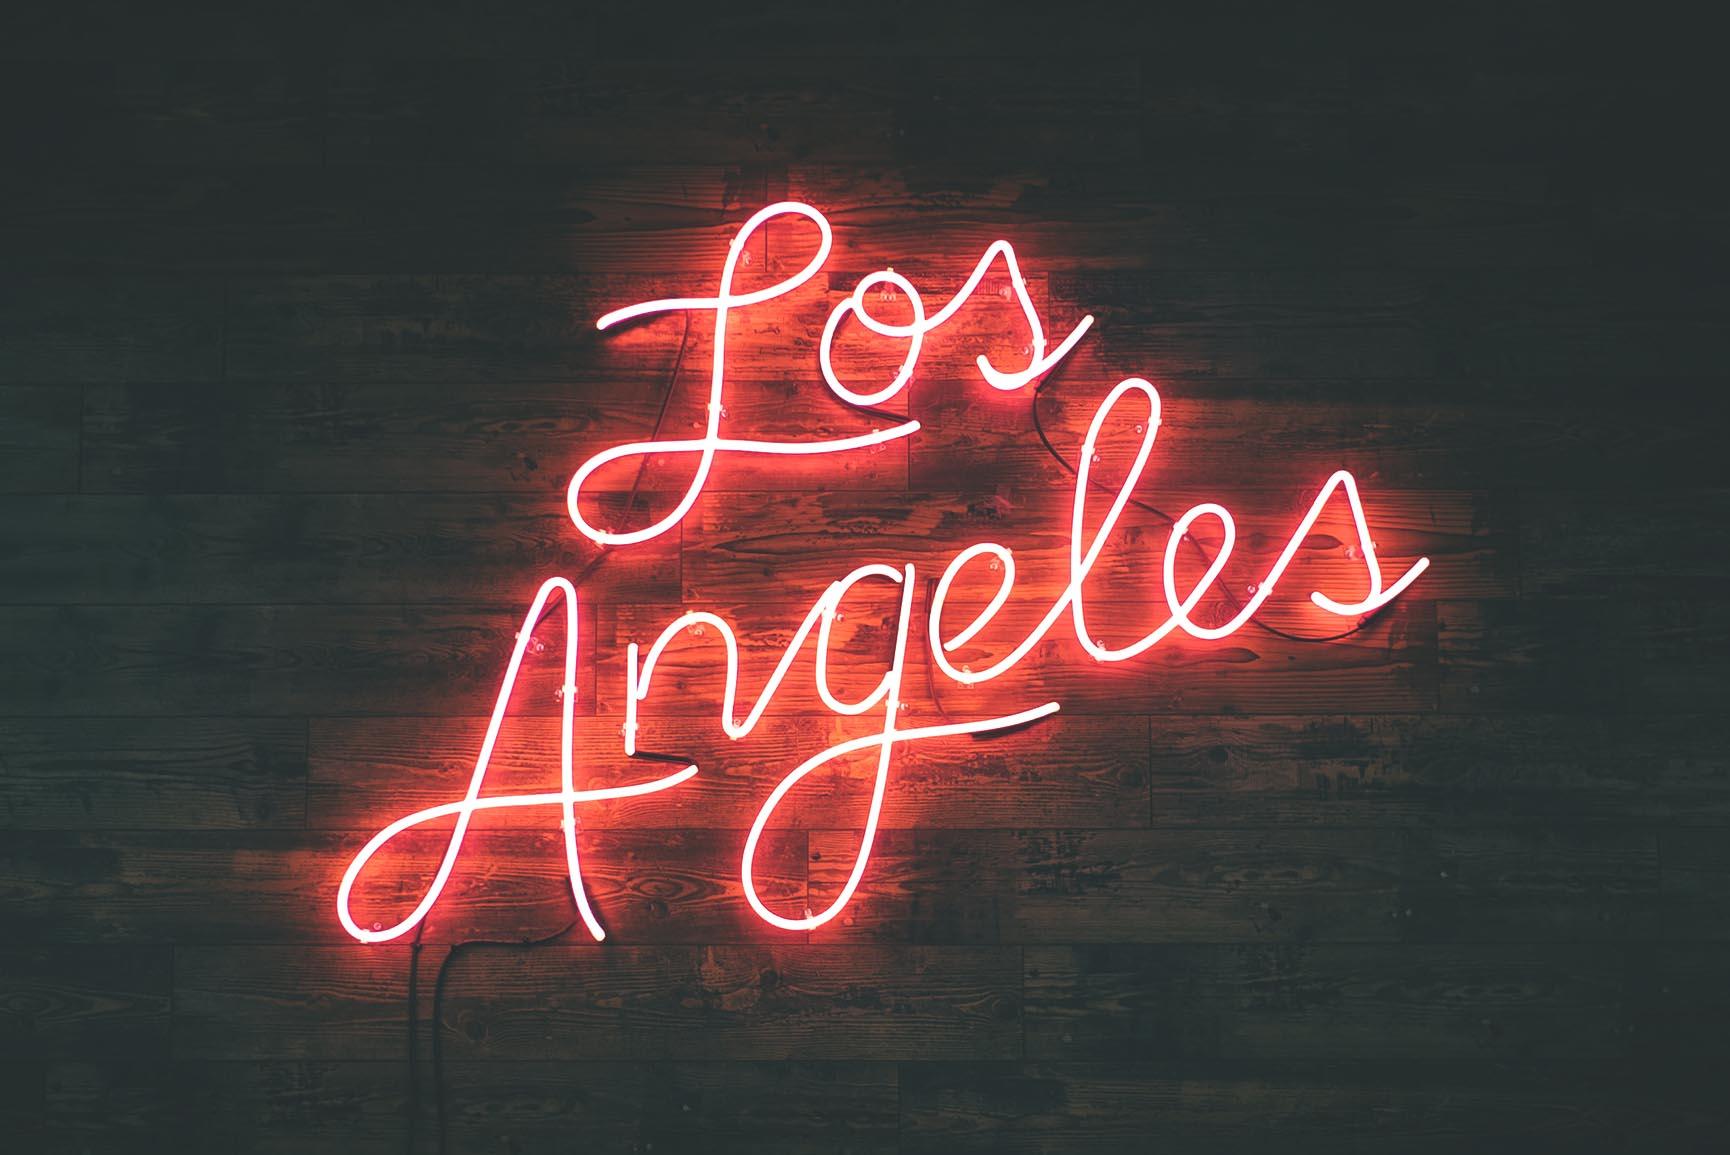 20 Beautiful Los Angeles iPhone X Wallpapers